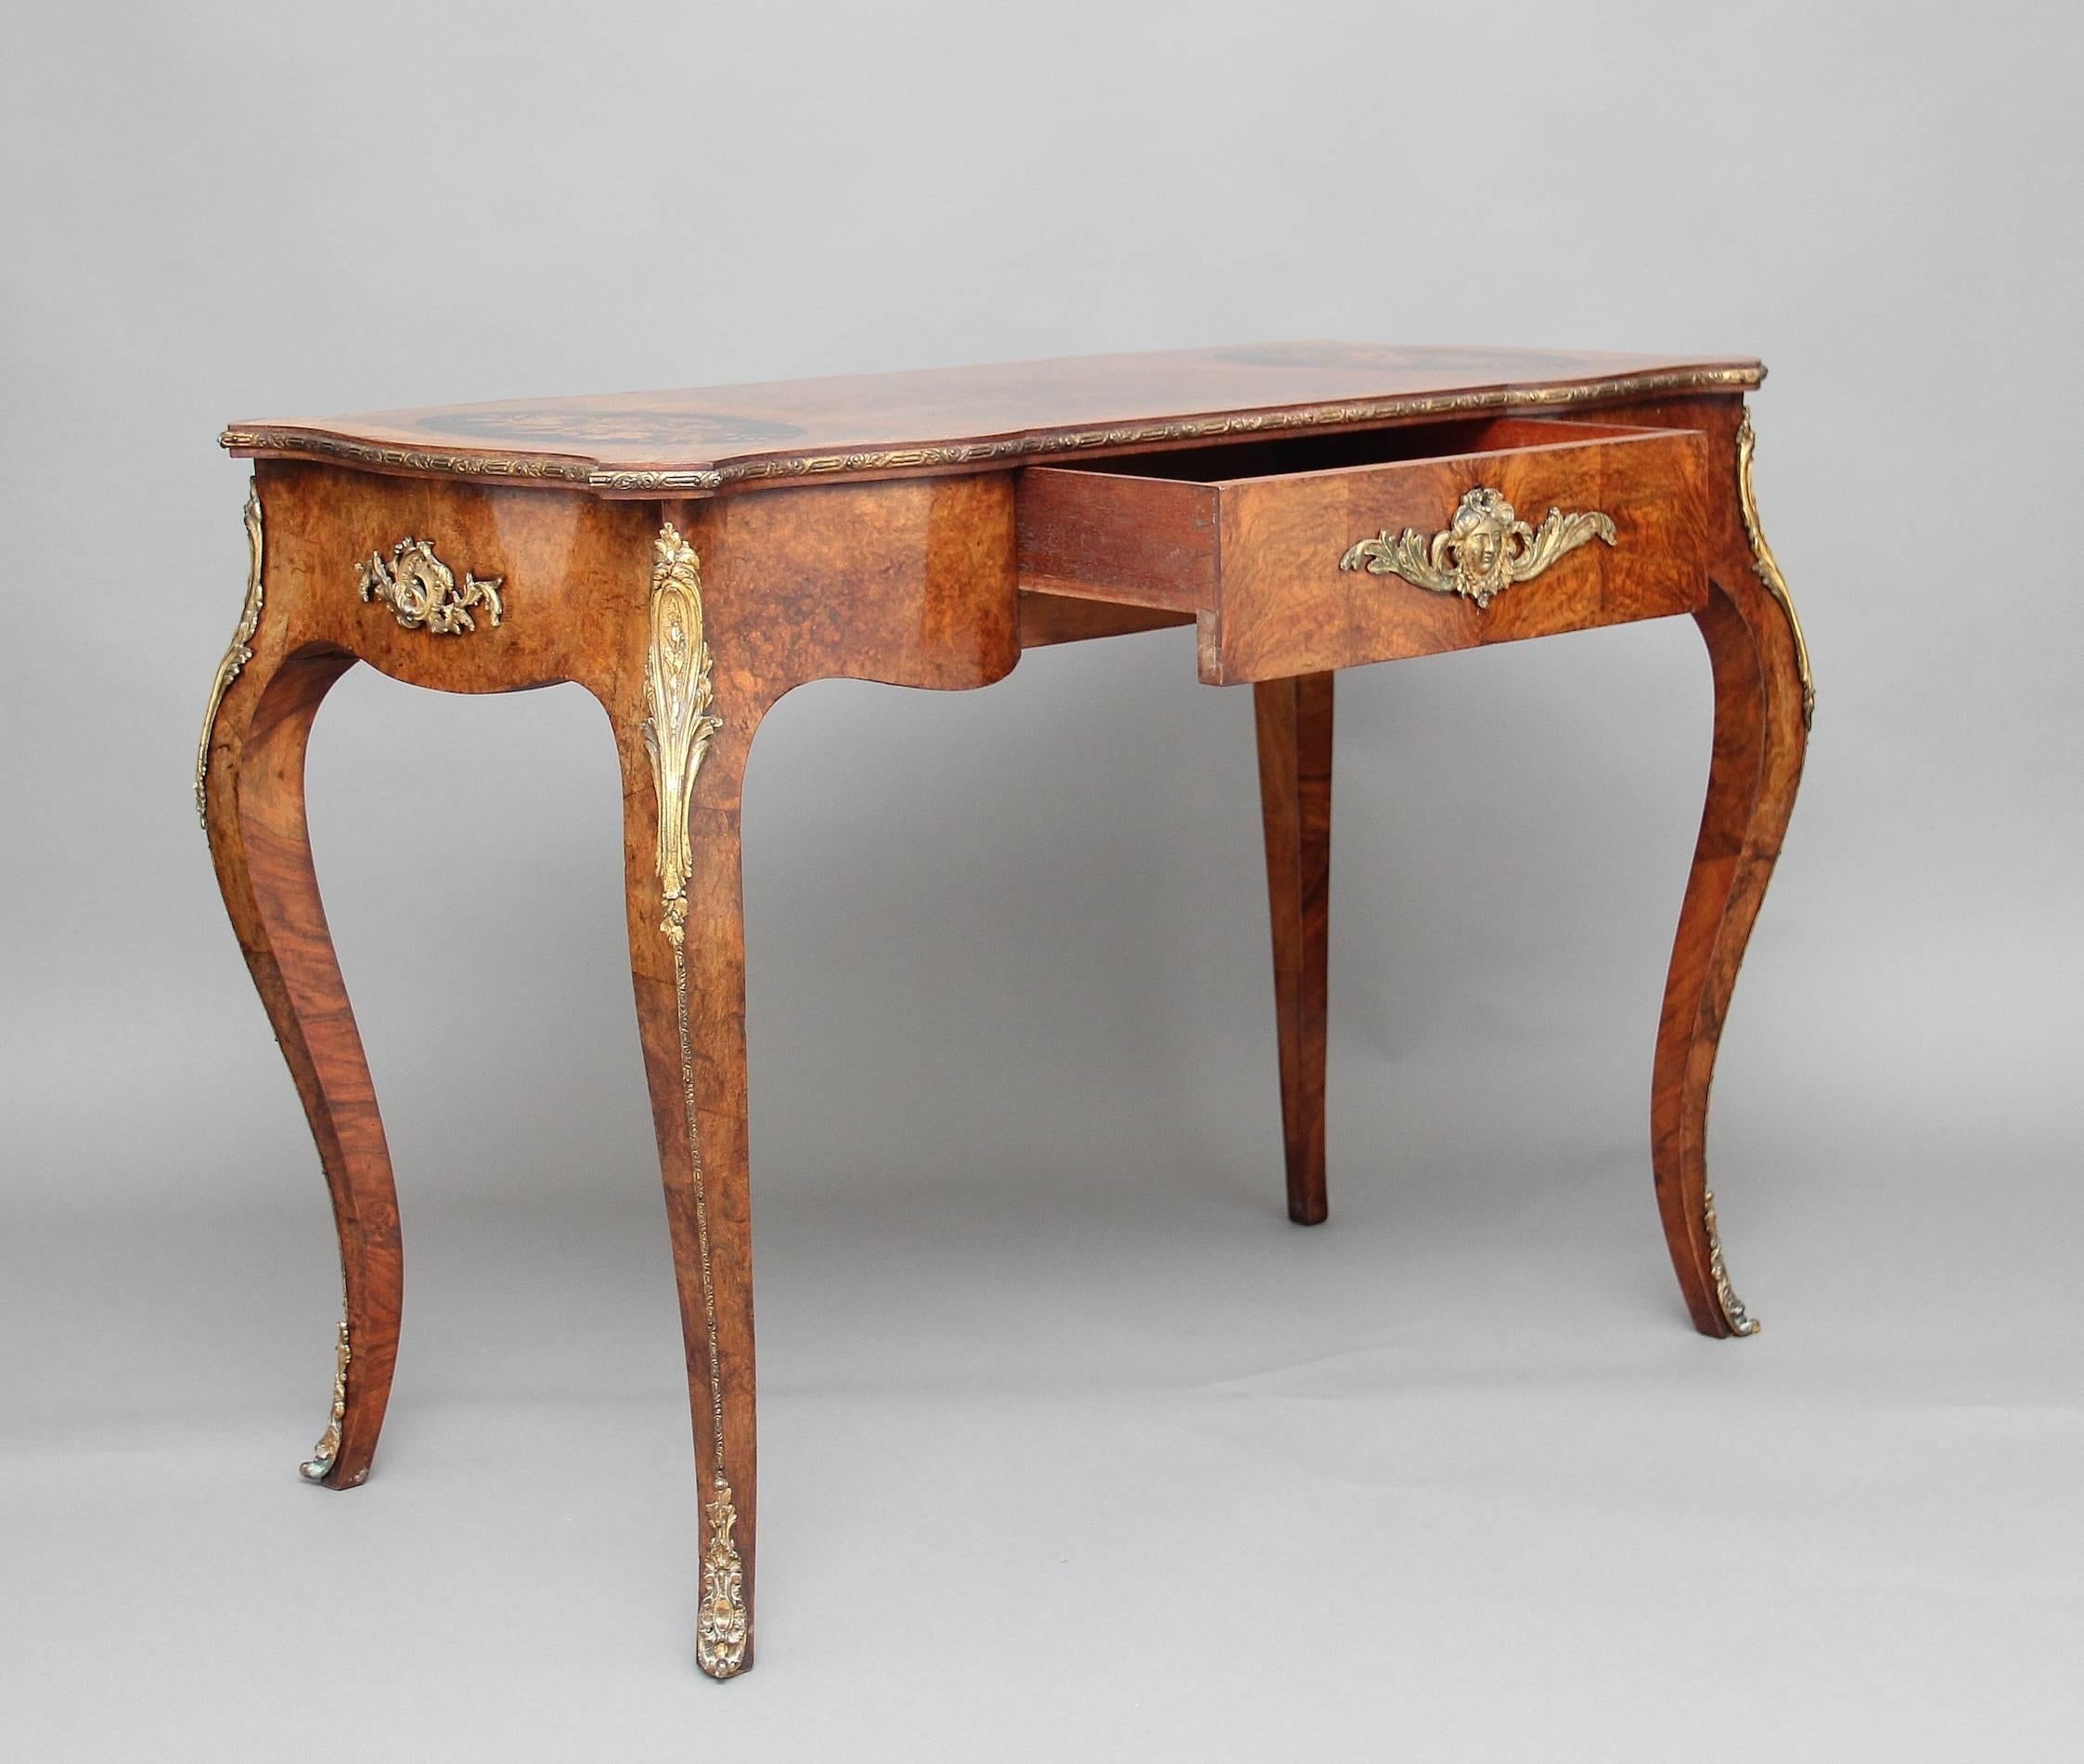 19th century walnut and ormolu-mounted writing table of serpentine form, the shaped top crossbanded in kingwood, with floral inlaid oval panels with an ebonized background, with a shaped frieze below running along the front, sides and back, which